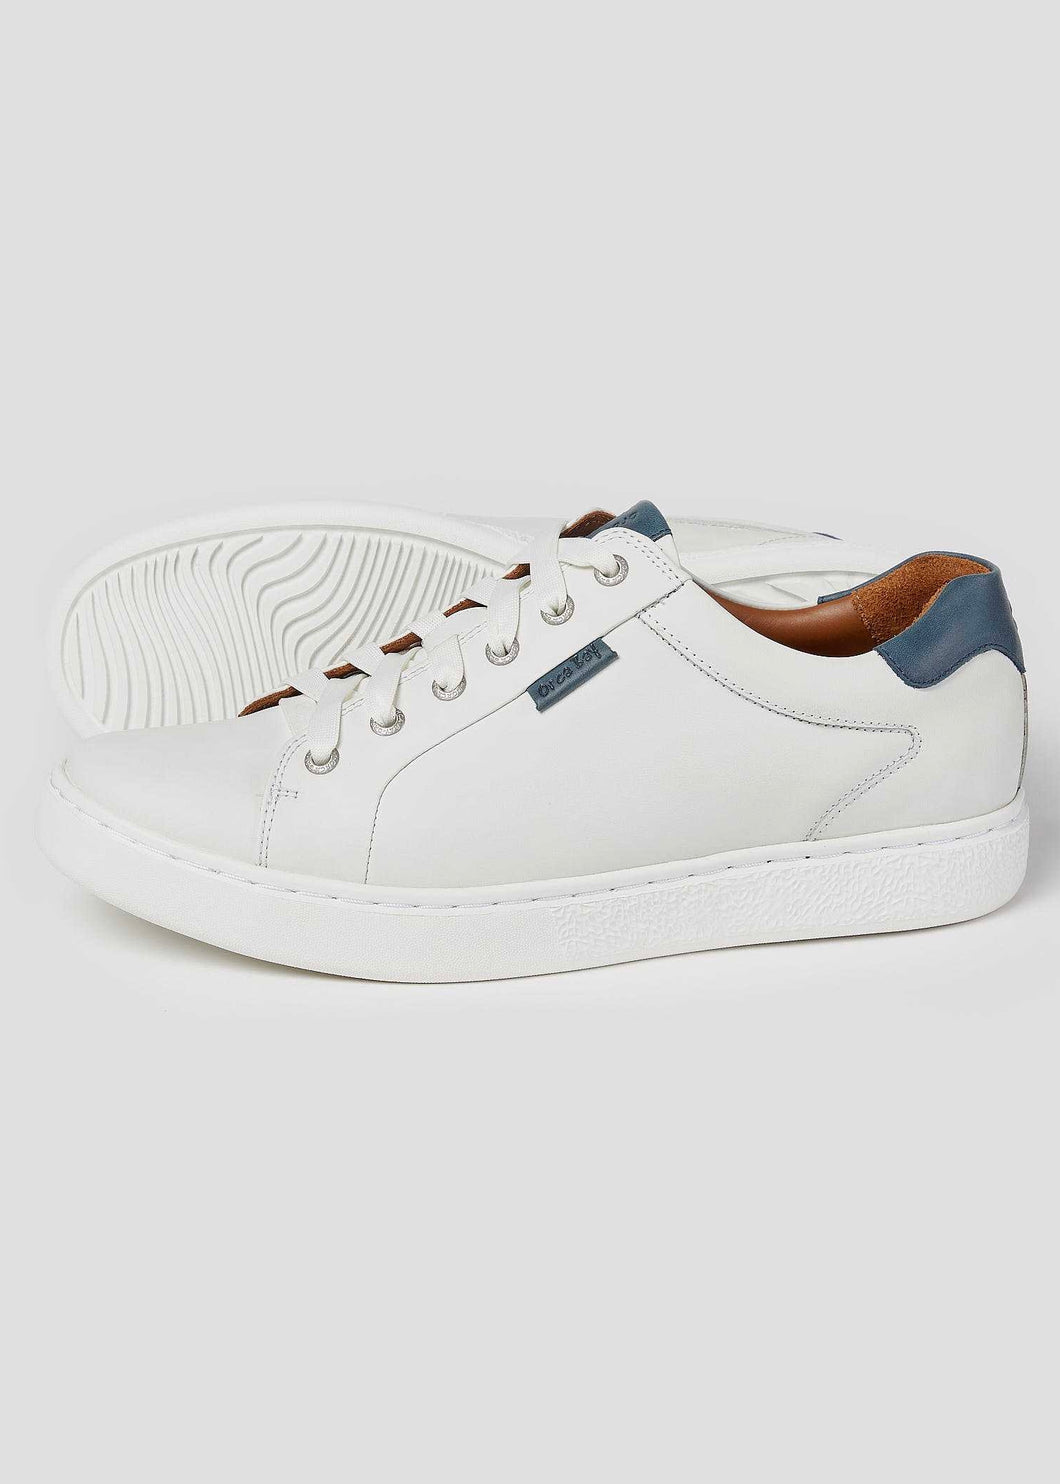 White trainers for men, showing all details. 